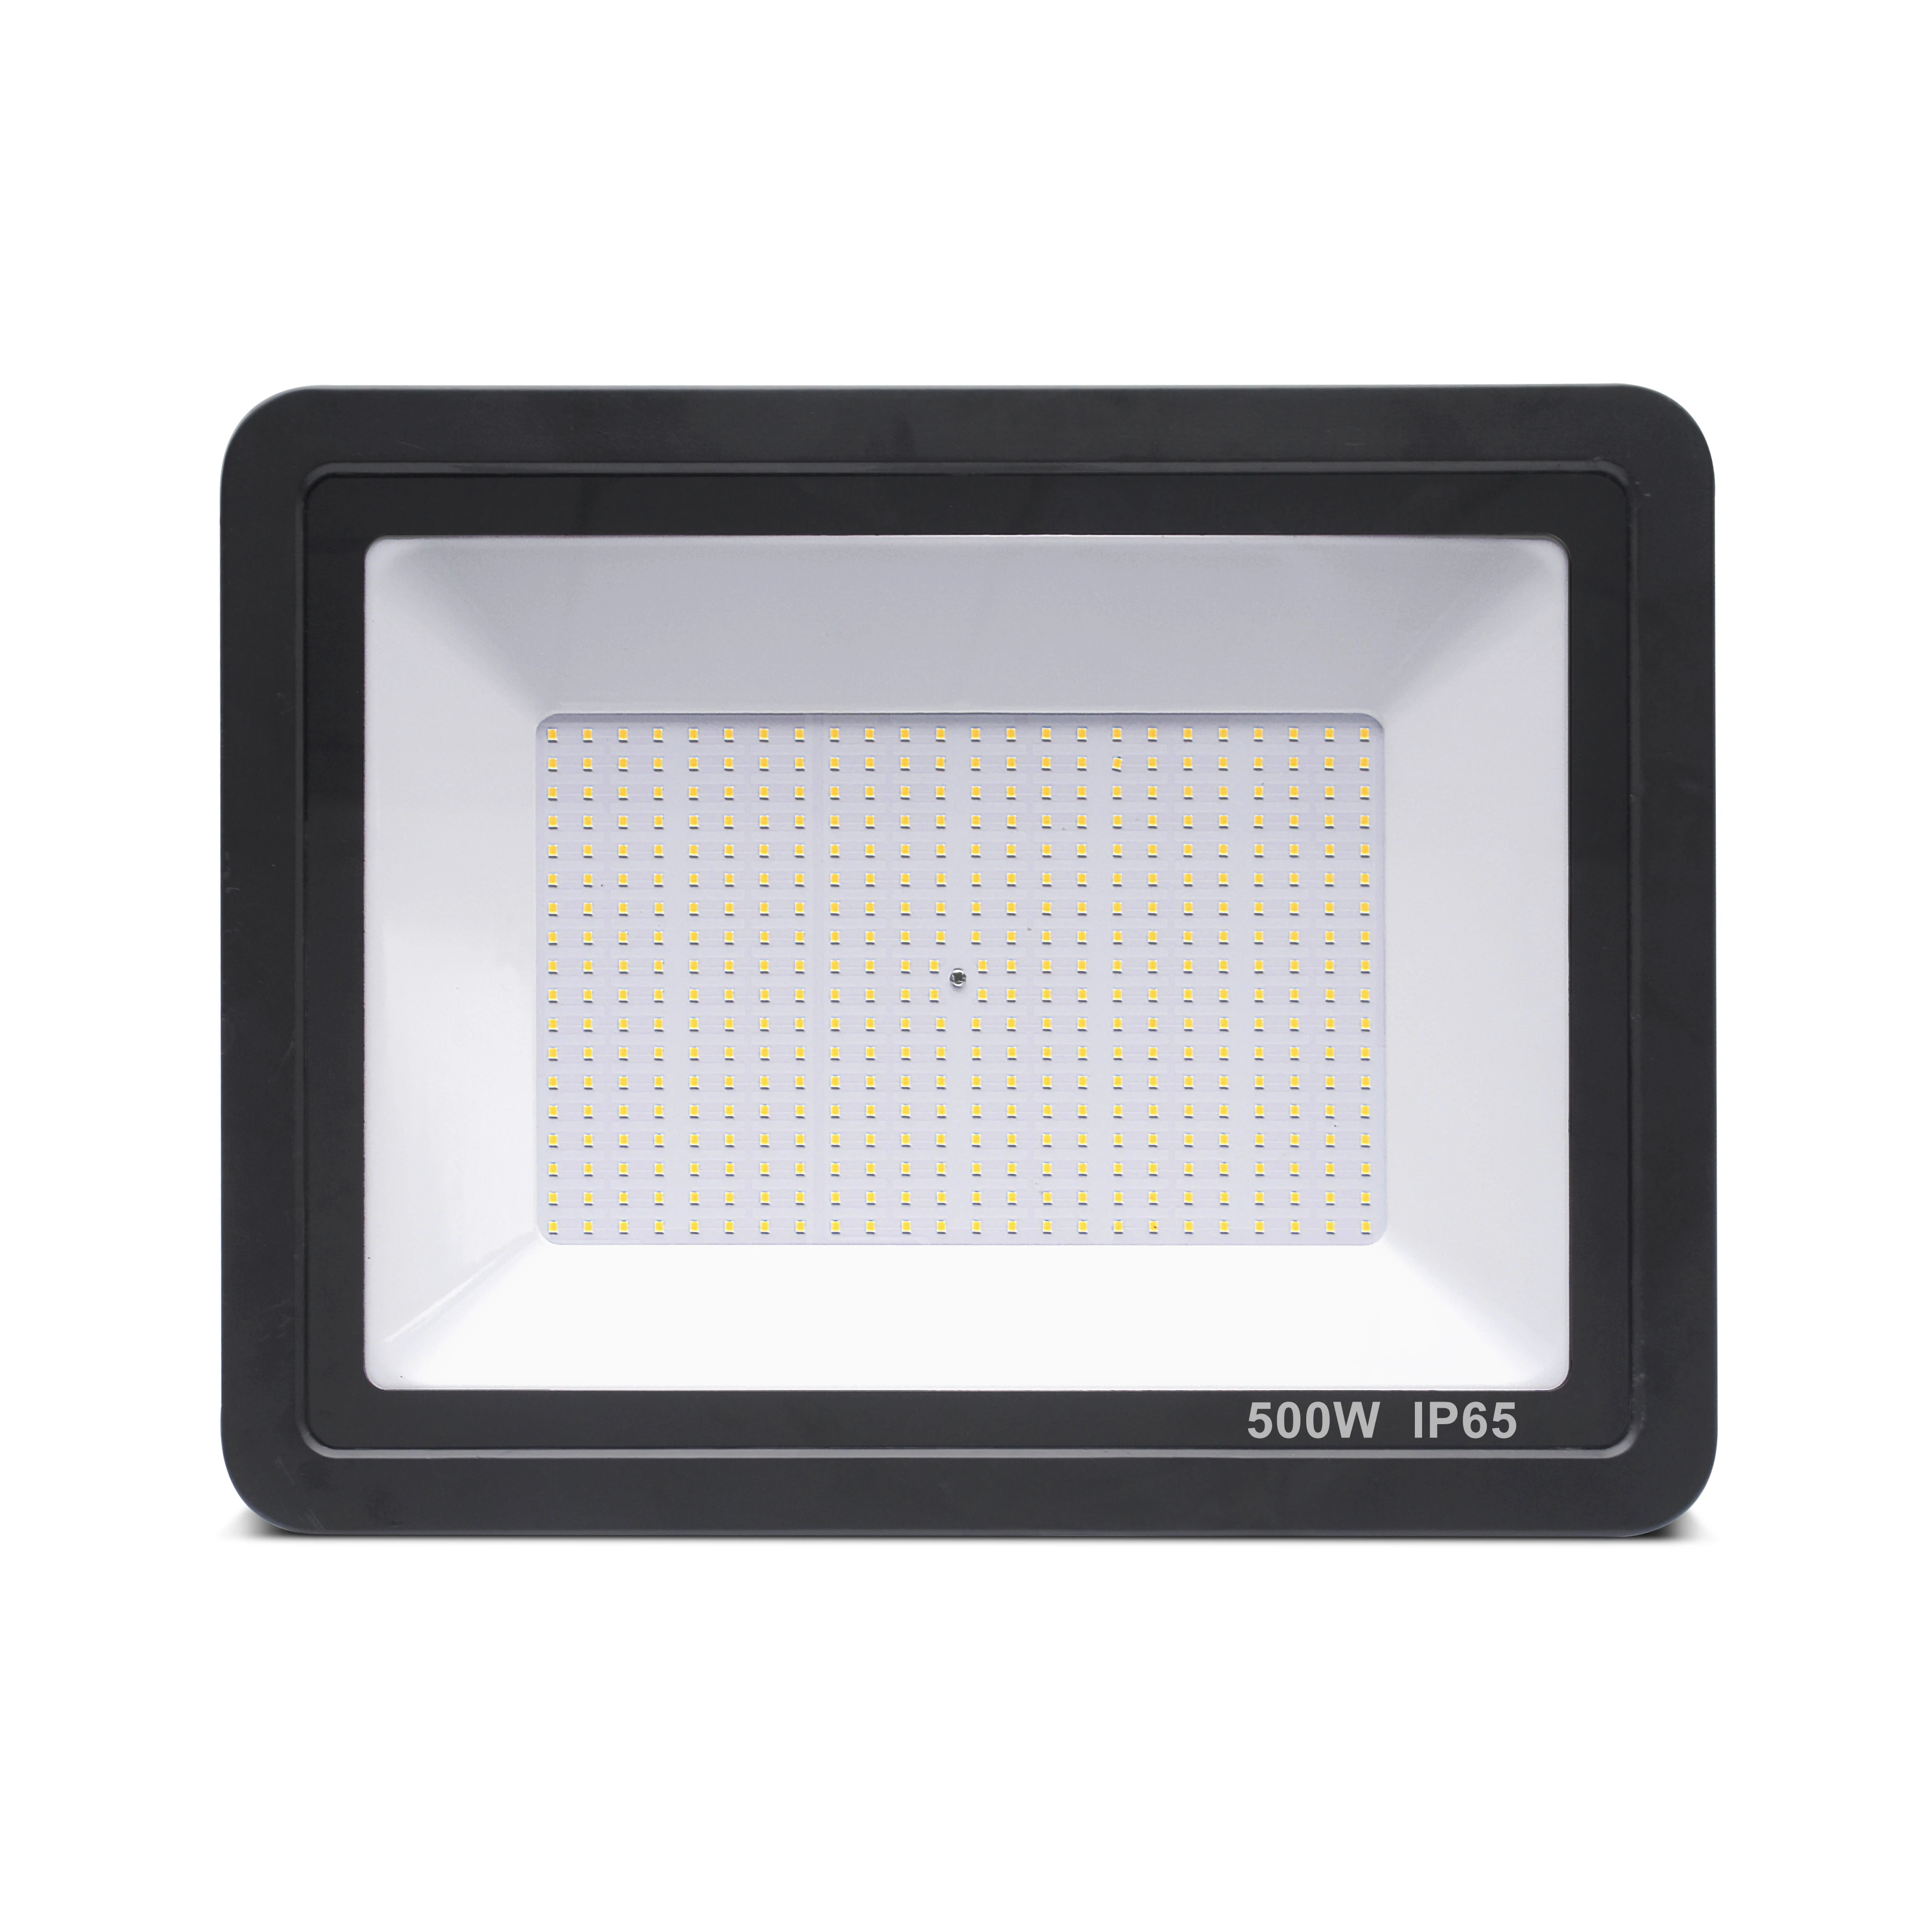 500W LED Outdoor Flood Lights 50000lm Super Bright Outside Floodlights, IP65 Waterproof Exterior Security Lights